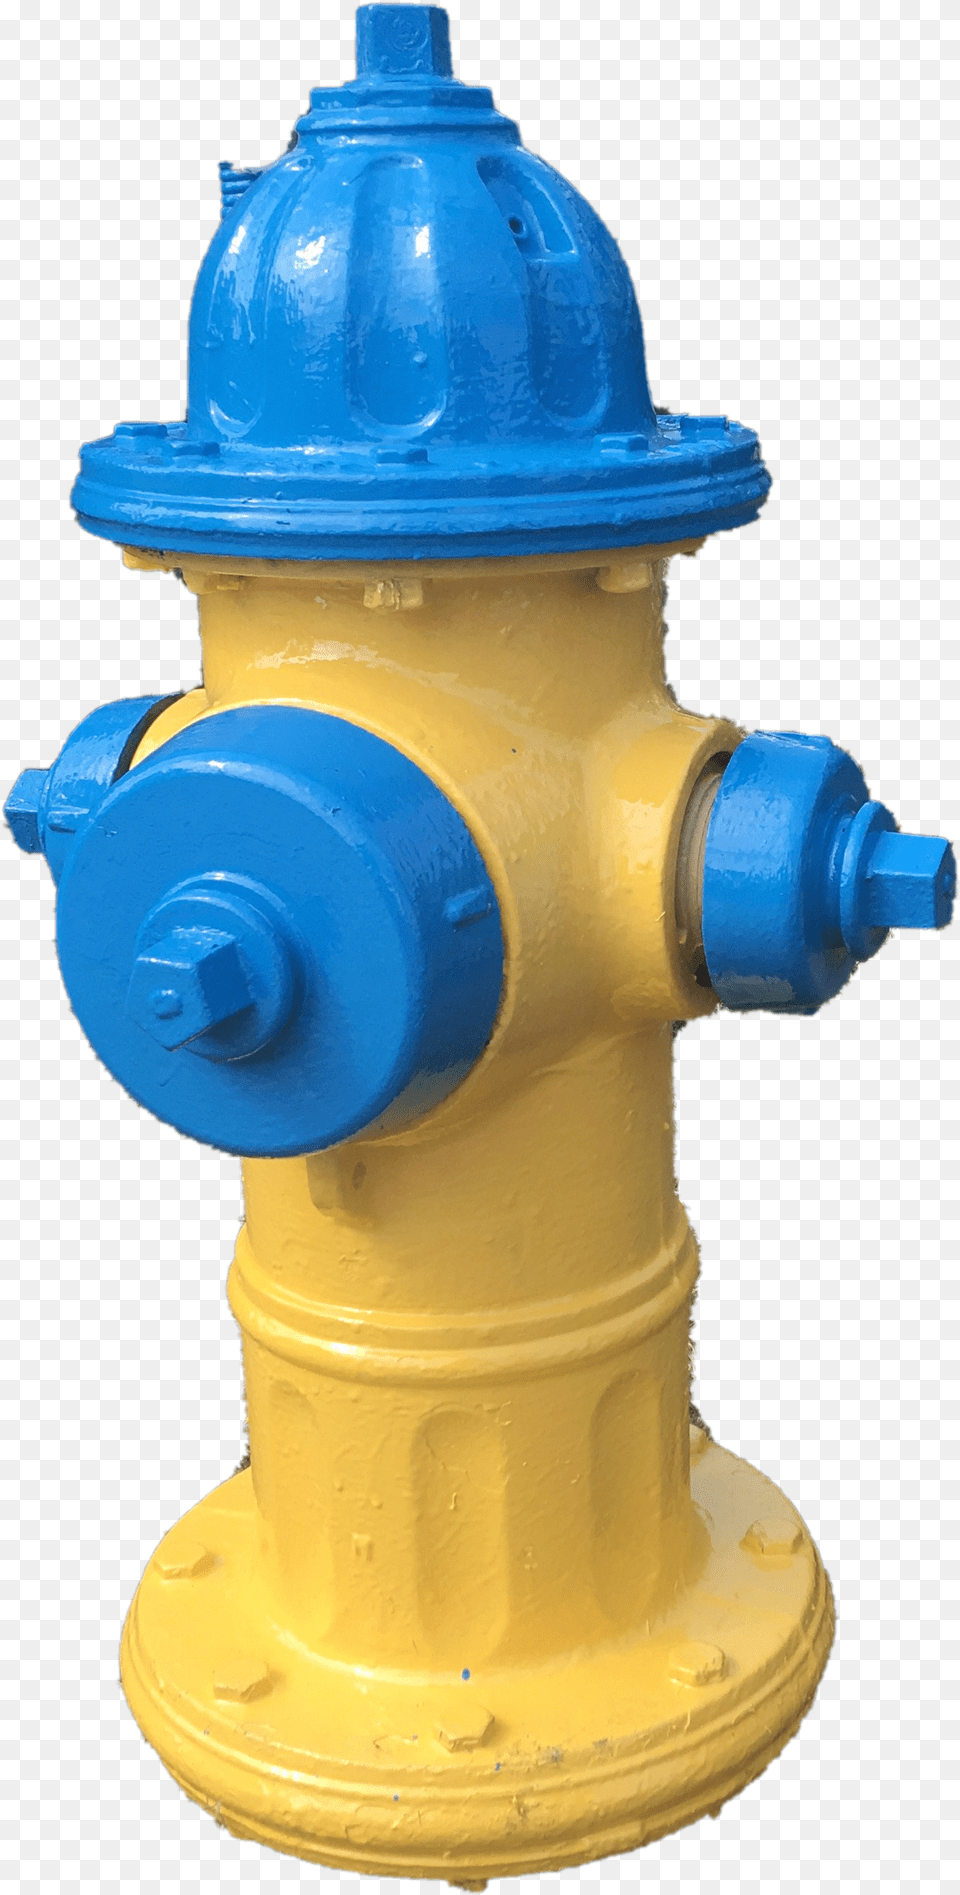 Yellow Fire Hydrant No Background Play Yellow Fire Hydrant, Fire Hydrant Png